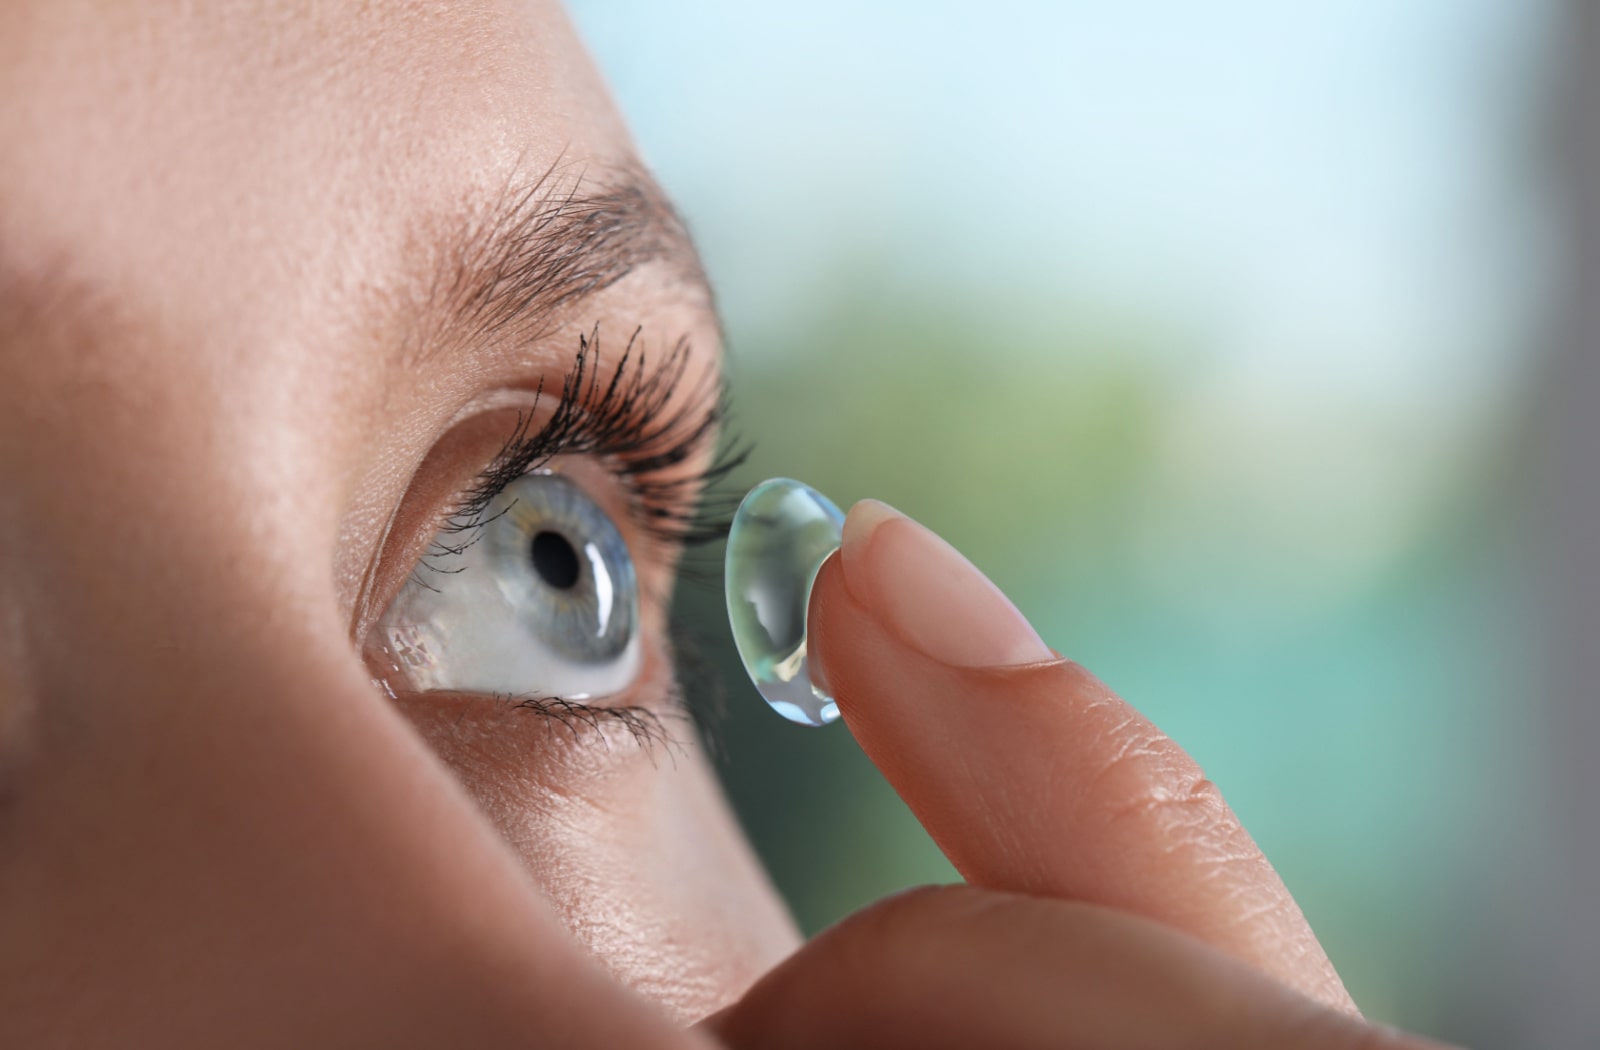 A woman using her index finger to place a contact lens into her eye